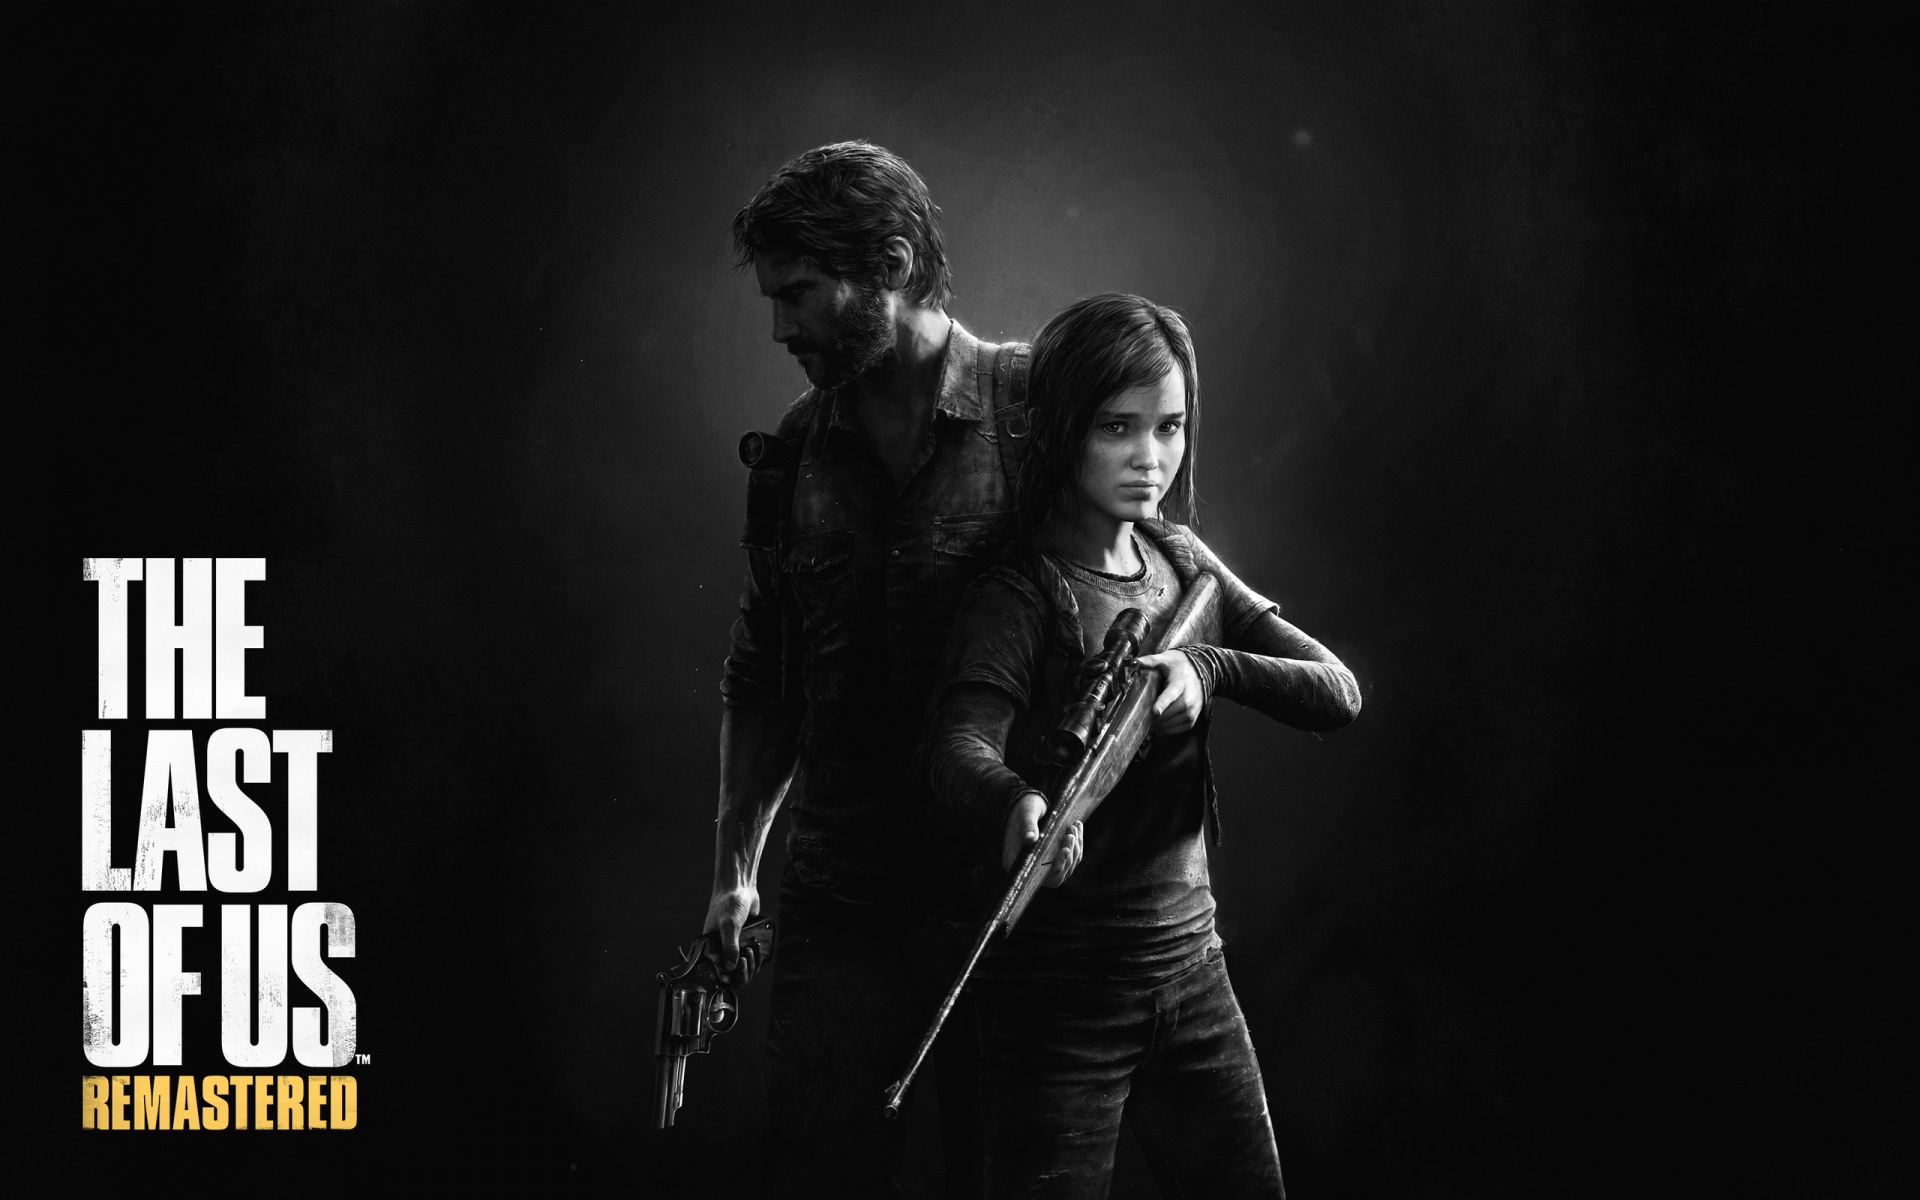 The Last Of Us Wallpapers Best Wallpapers HD Wallpapers Download Free Images Wallpaper [wallpaper981.blogspot.com]